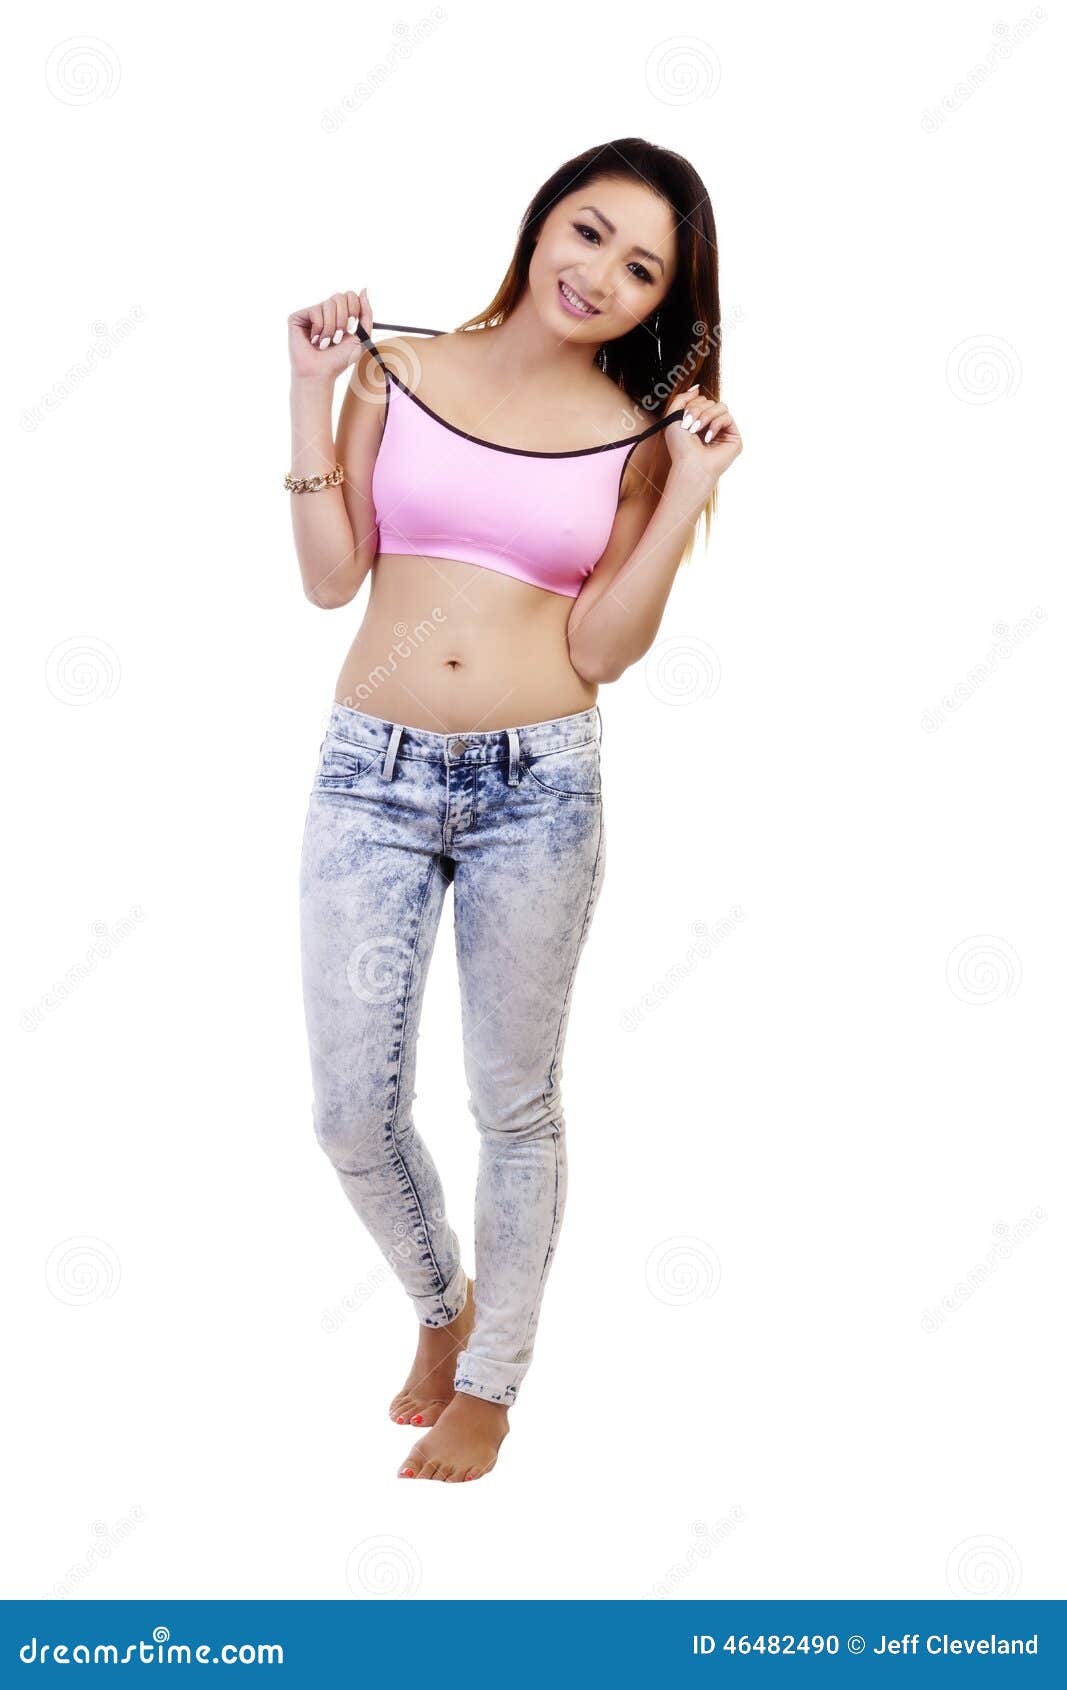 Asian American Woman Jeans Pink Sports Bra Stock Photo - Image of